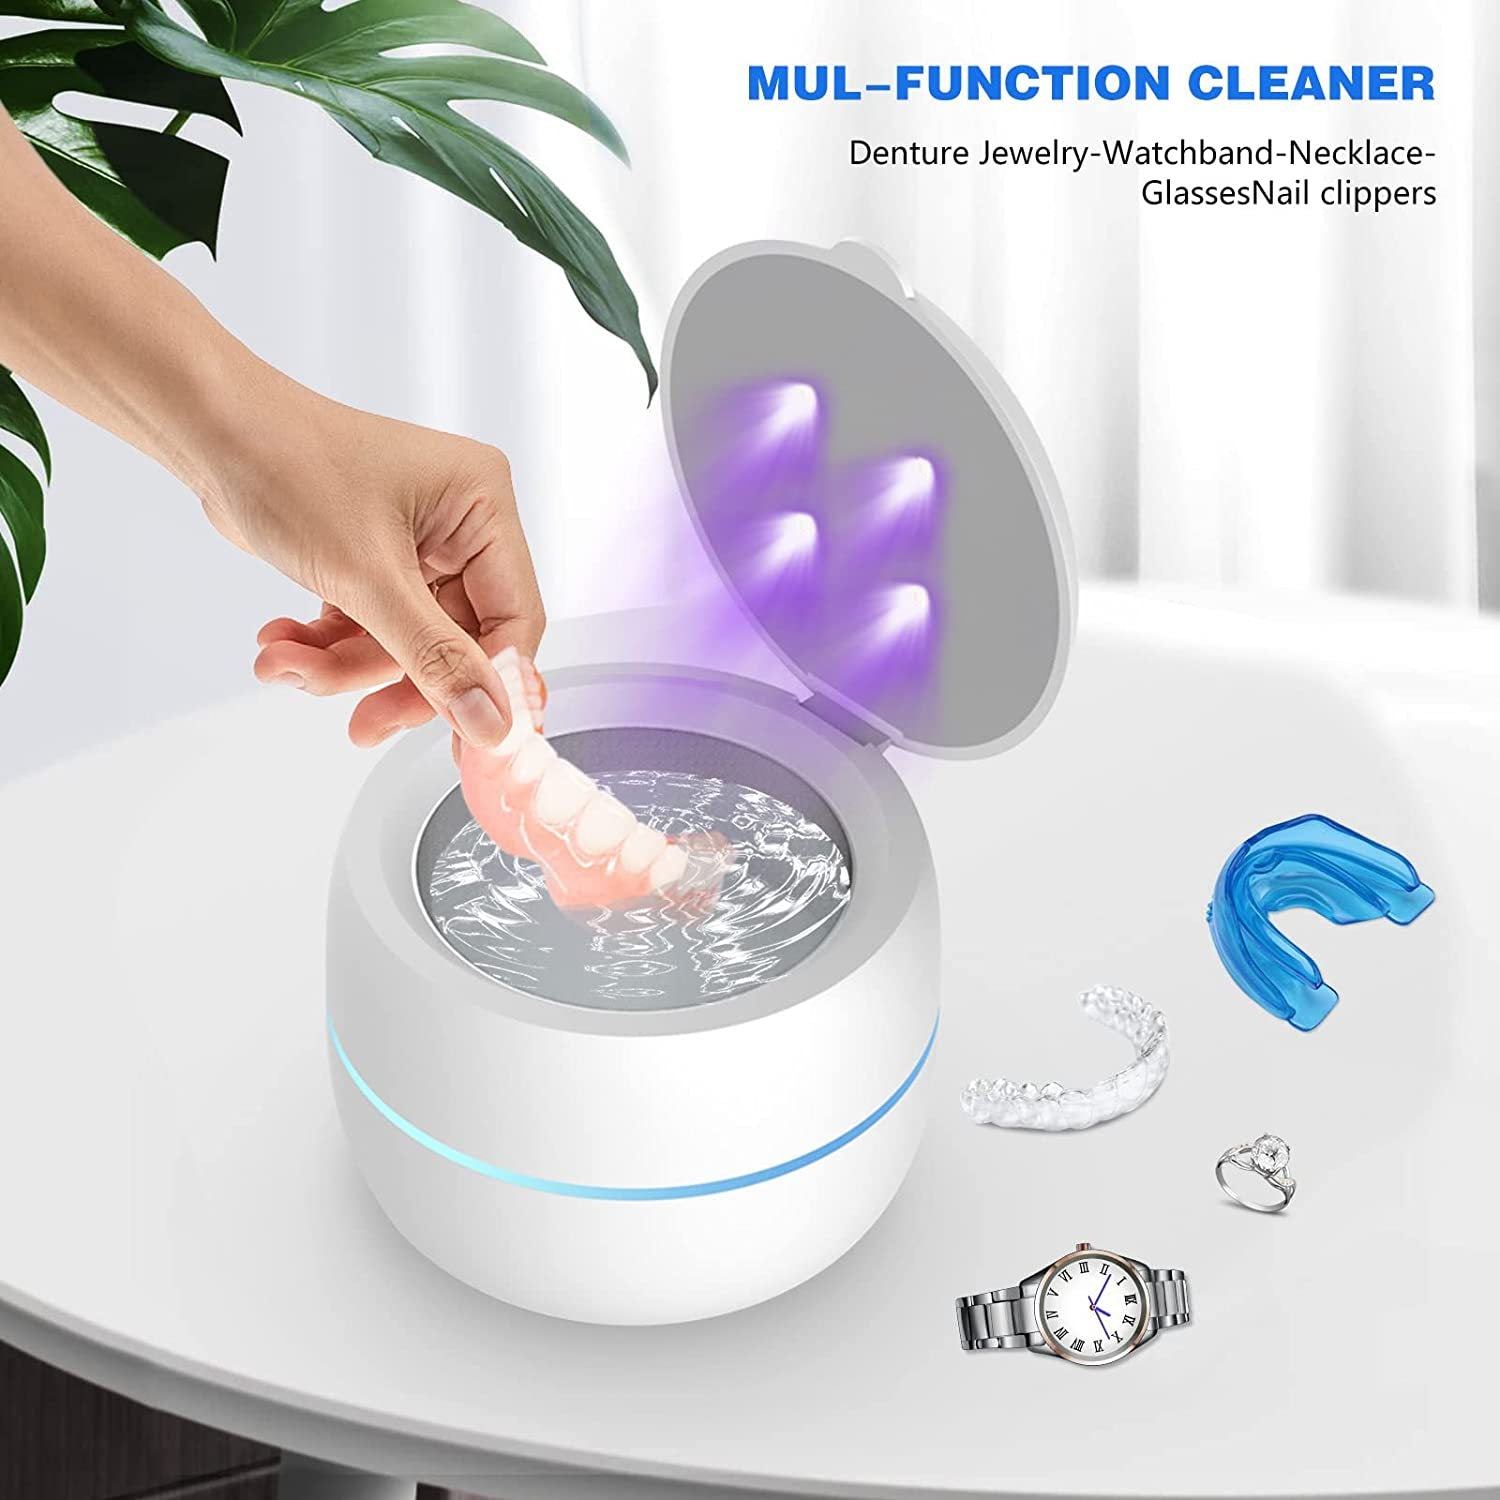 🌟 Introducing the Ultimate Cleaning Solution! 🌟  Tired of struggling to clean your precious aligners, glasses, and jewellery? Emporium Discounts has the answer! Our Home Ultrasonic Cleaning Machine is here to make your life easier.